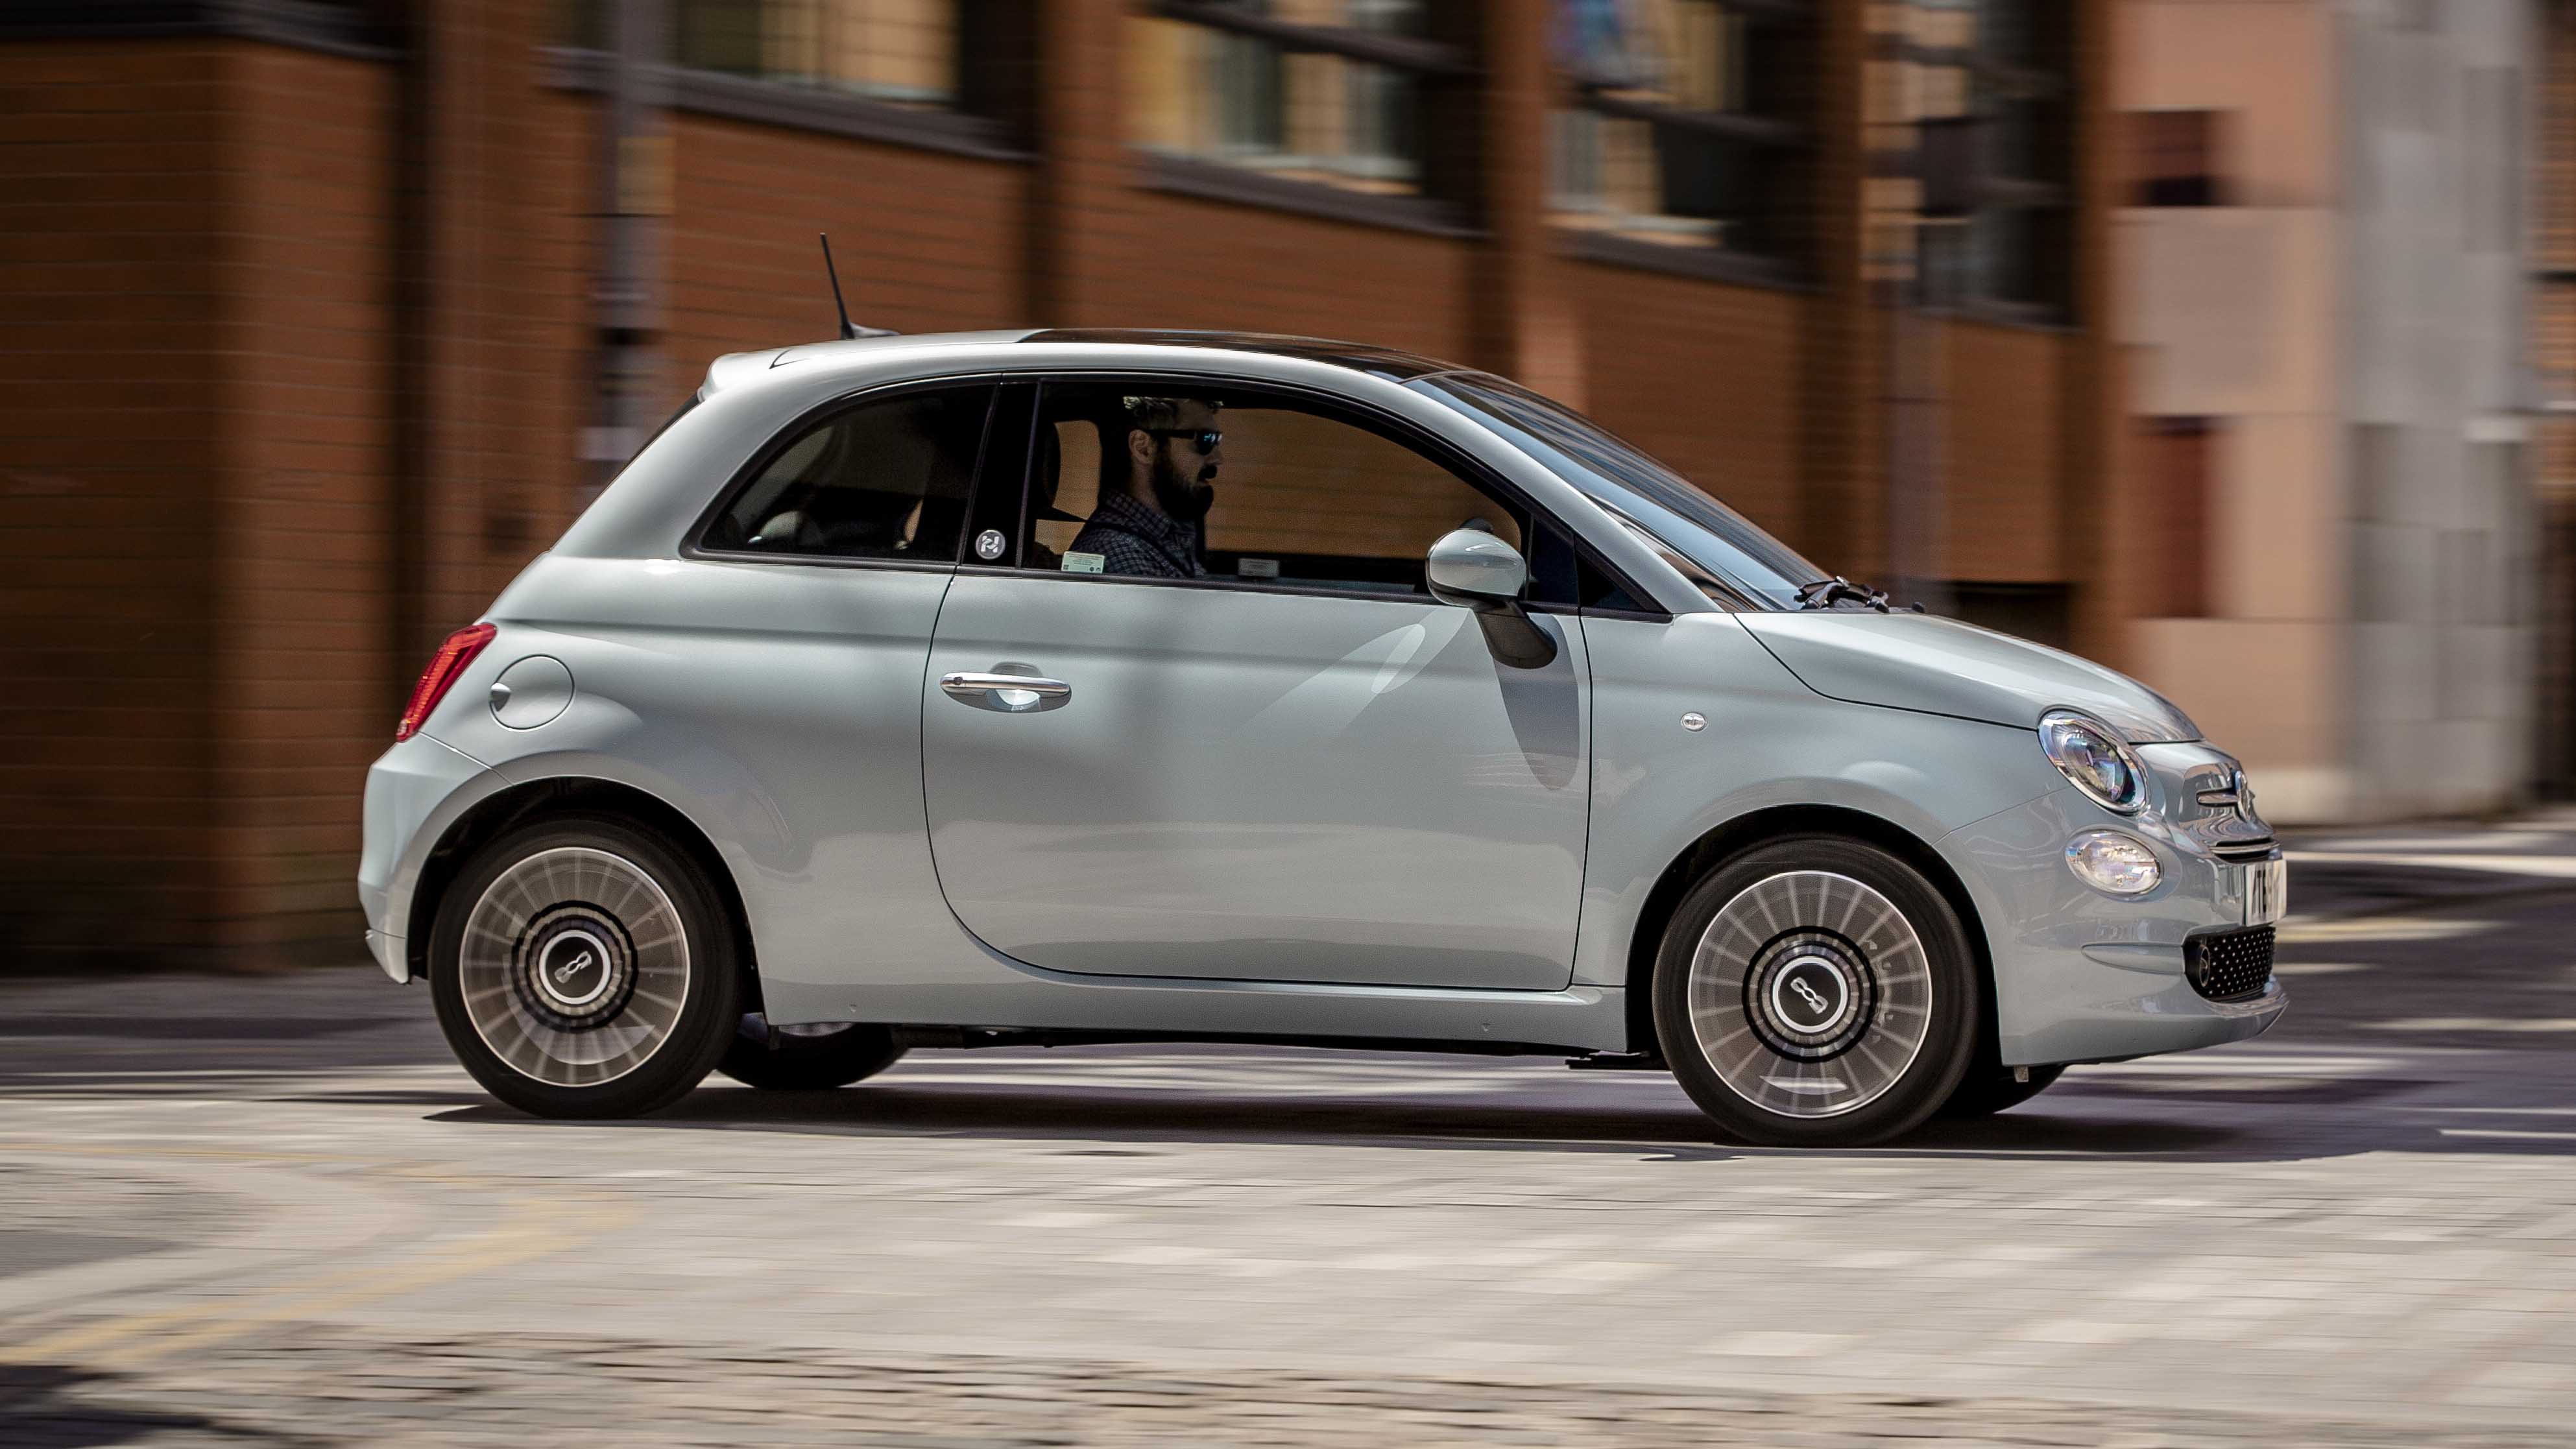 2020 Fiat 500 review: the boutique electric car of choice